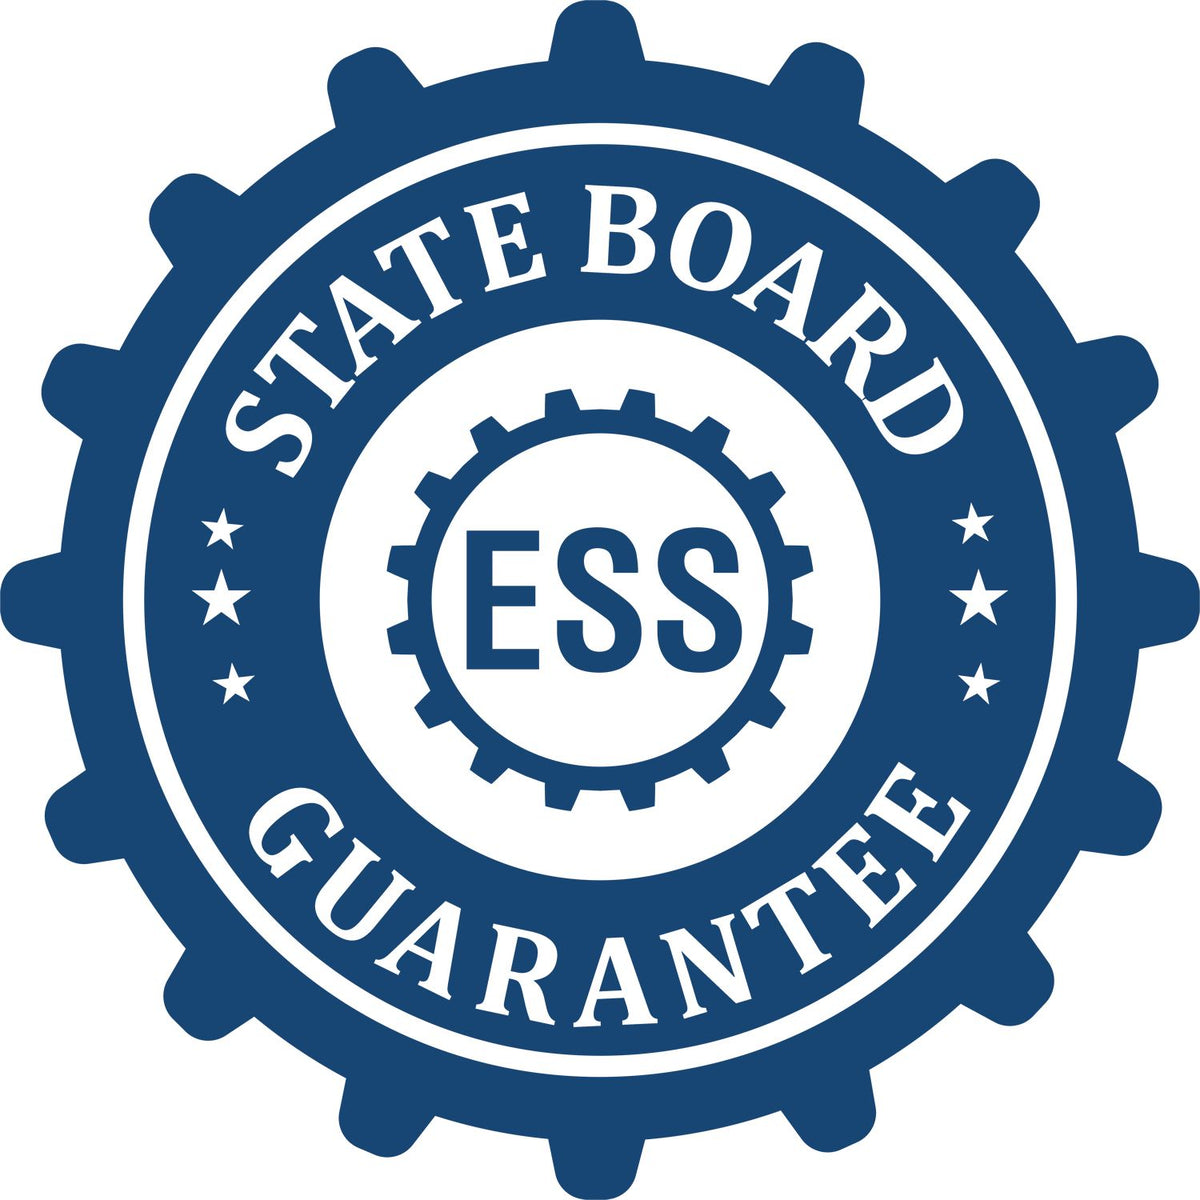 An emblem in a gear shape illustrating a state board guarantee for the Hybrid Georgia Land Surveyor Seal